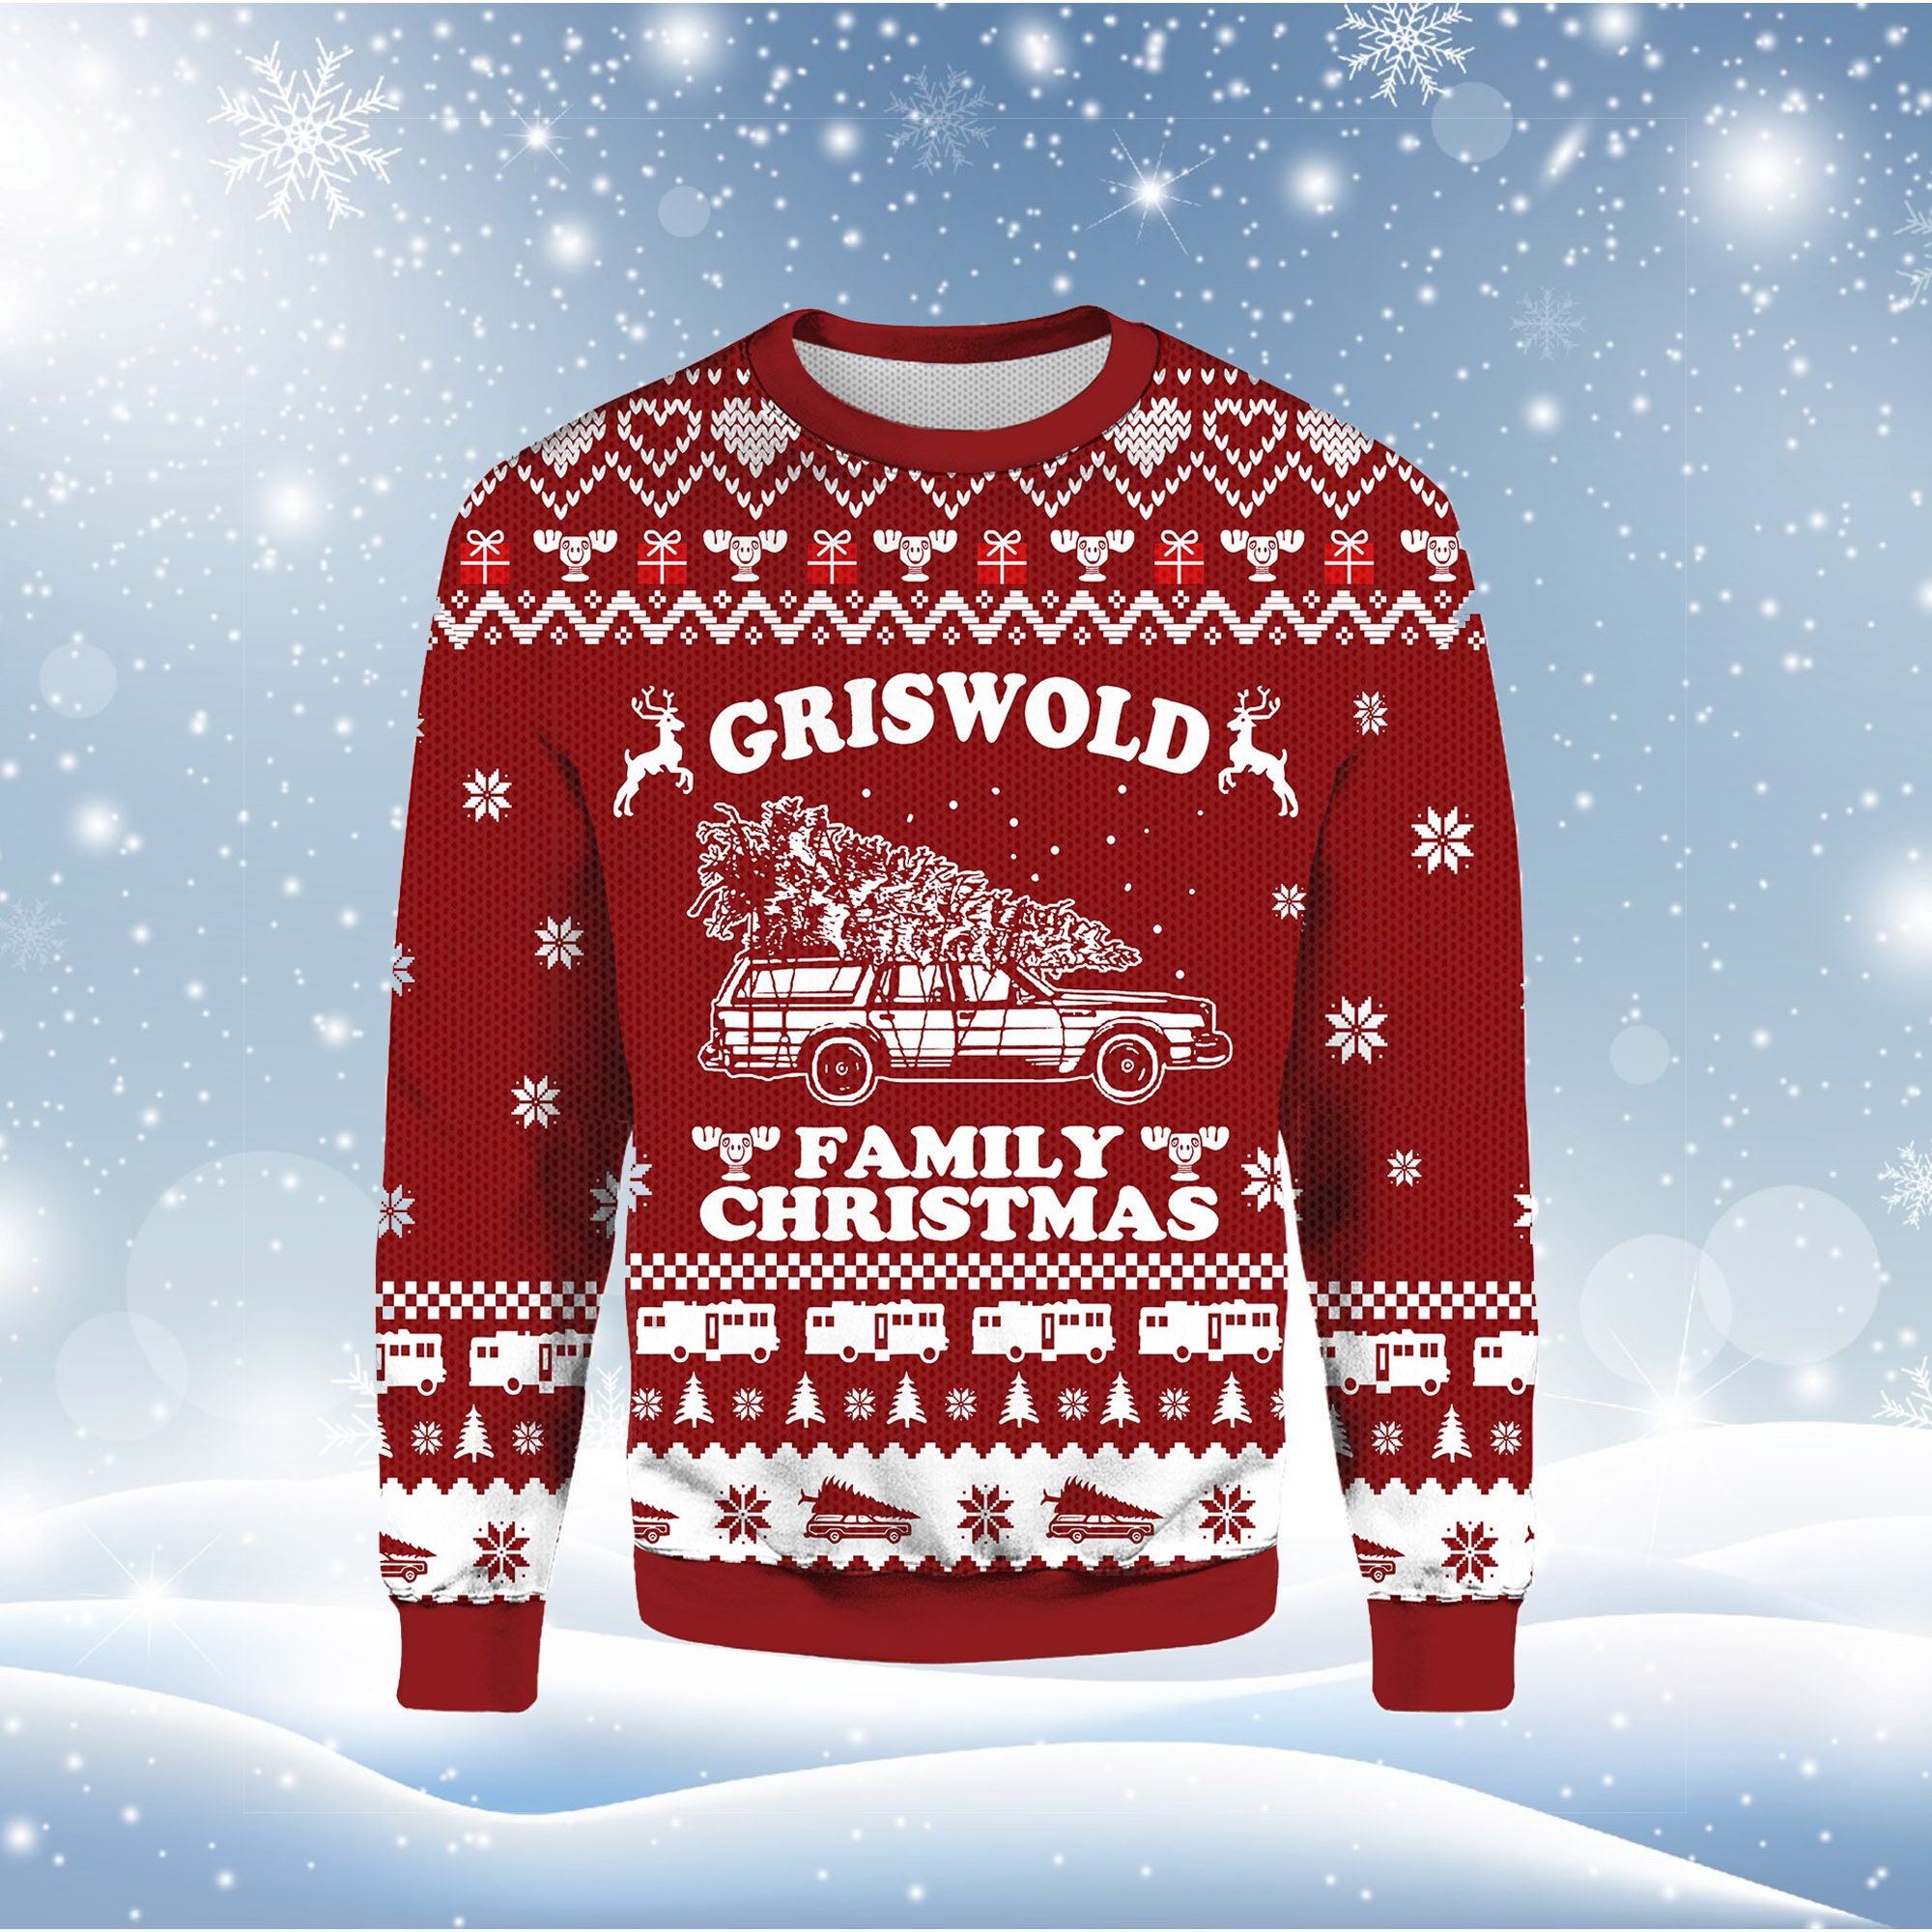 Griswold christmas sweater - Etsy.de